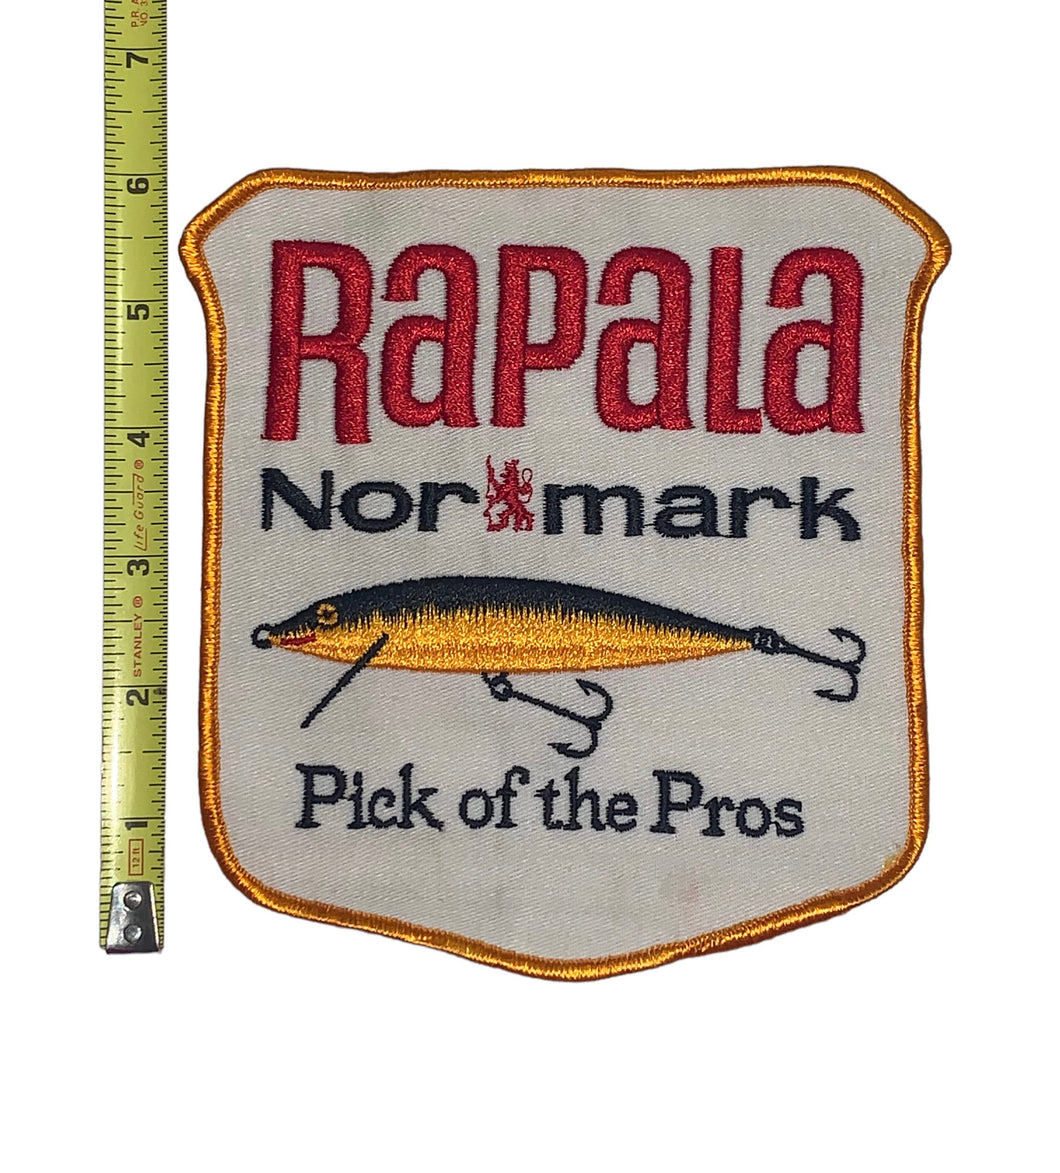 Rare RAPALA NOR MARK (Nor-Mark, Normark) PICK OF THE PROS Vintage Patch Crest